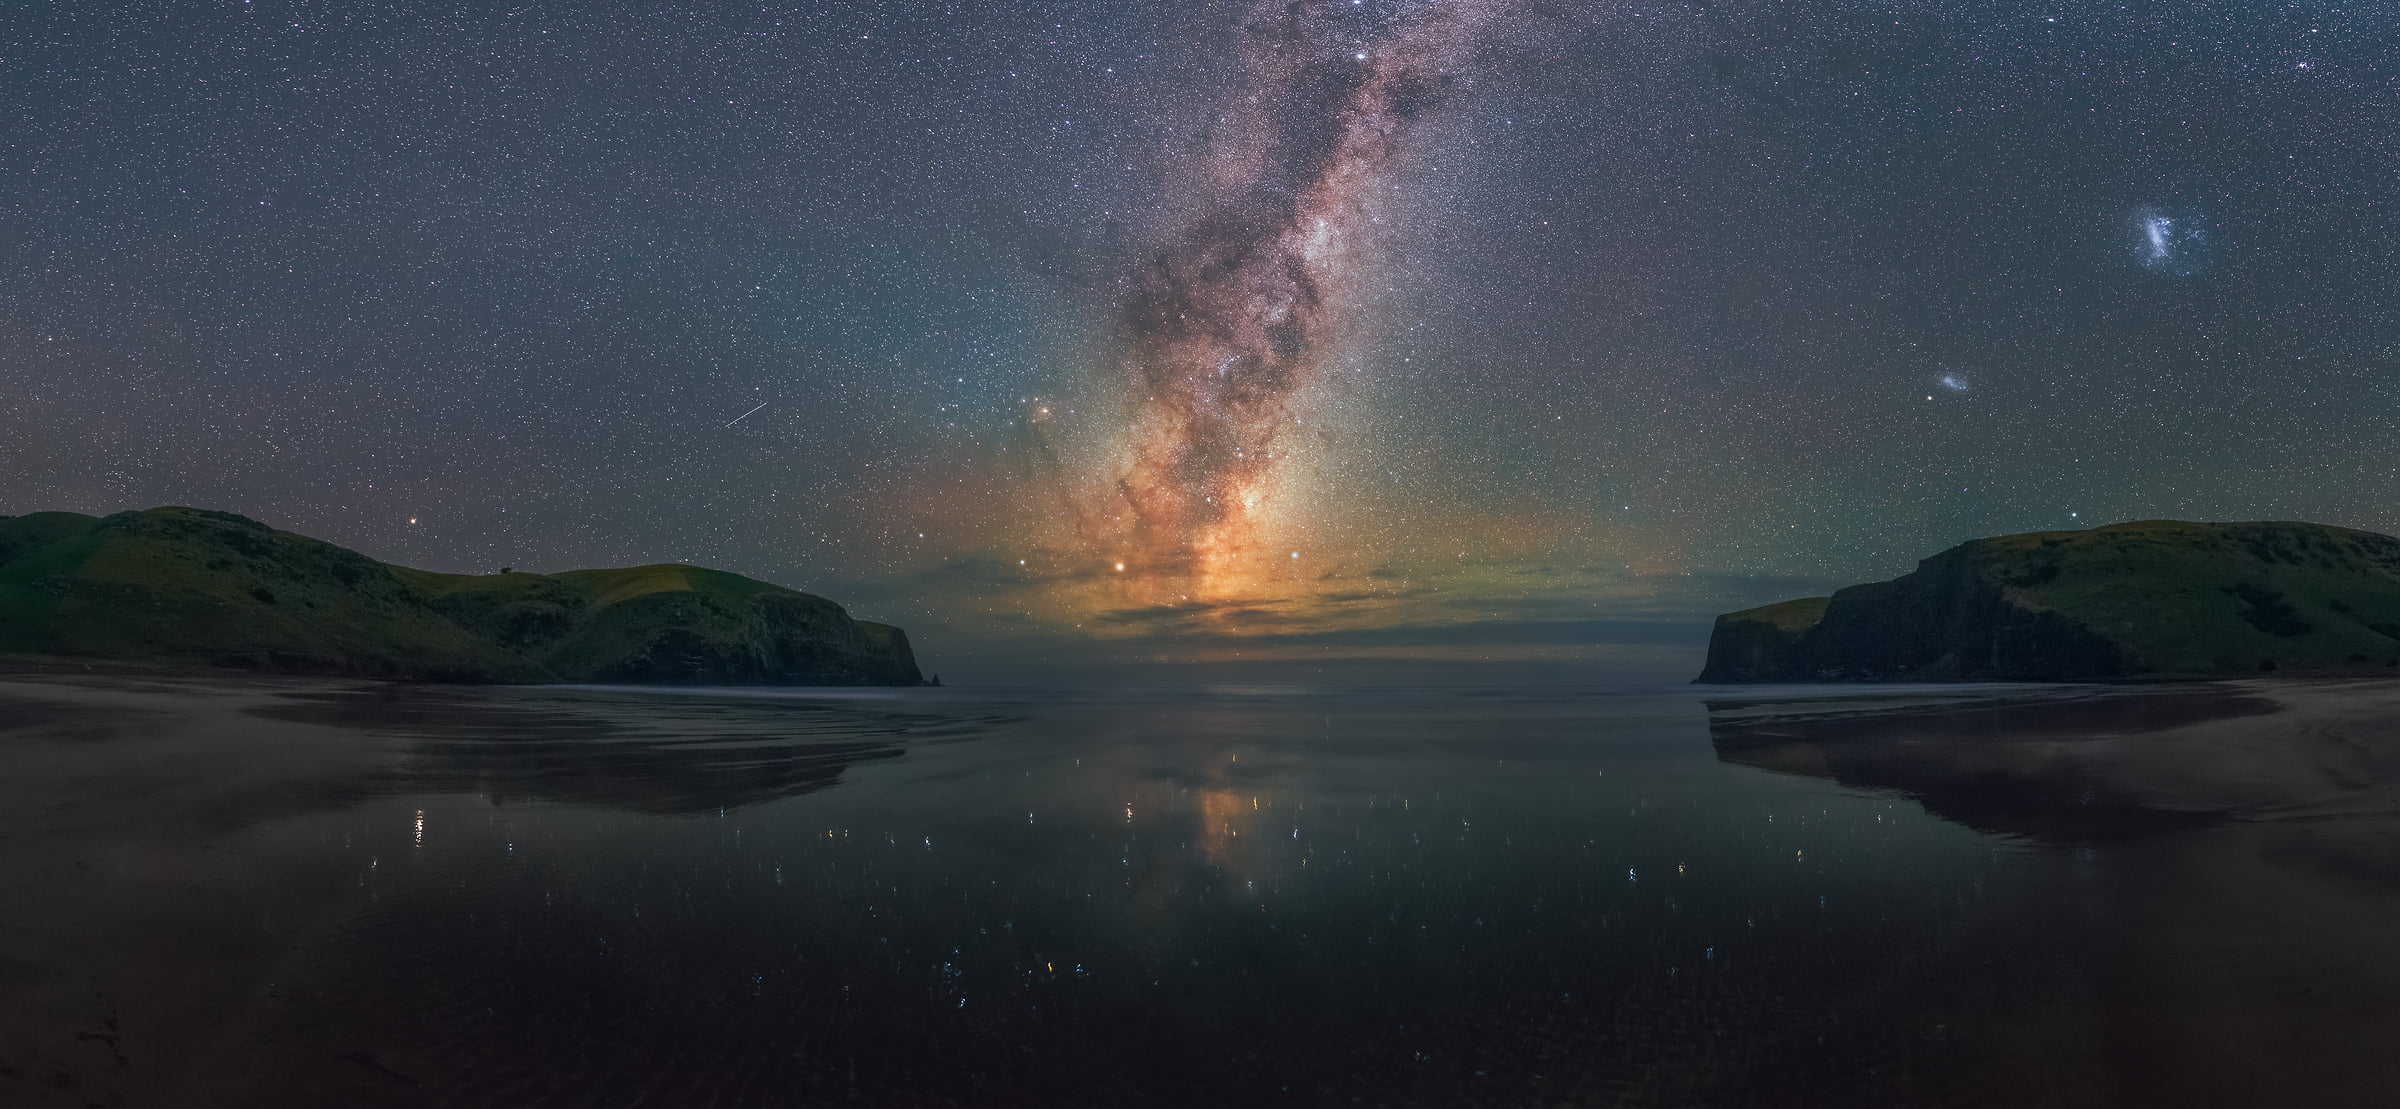 113 megapixels! A very high resolution, large-format VAST photo of the Milky Way, stars, and night sky over a beach; fine art landscape astrophotograph created by astrophotographer Paul Wilson in Eastern Bays, Banks Peninsula, New Zealand.